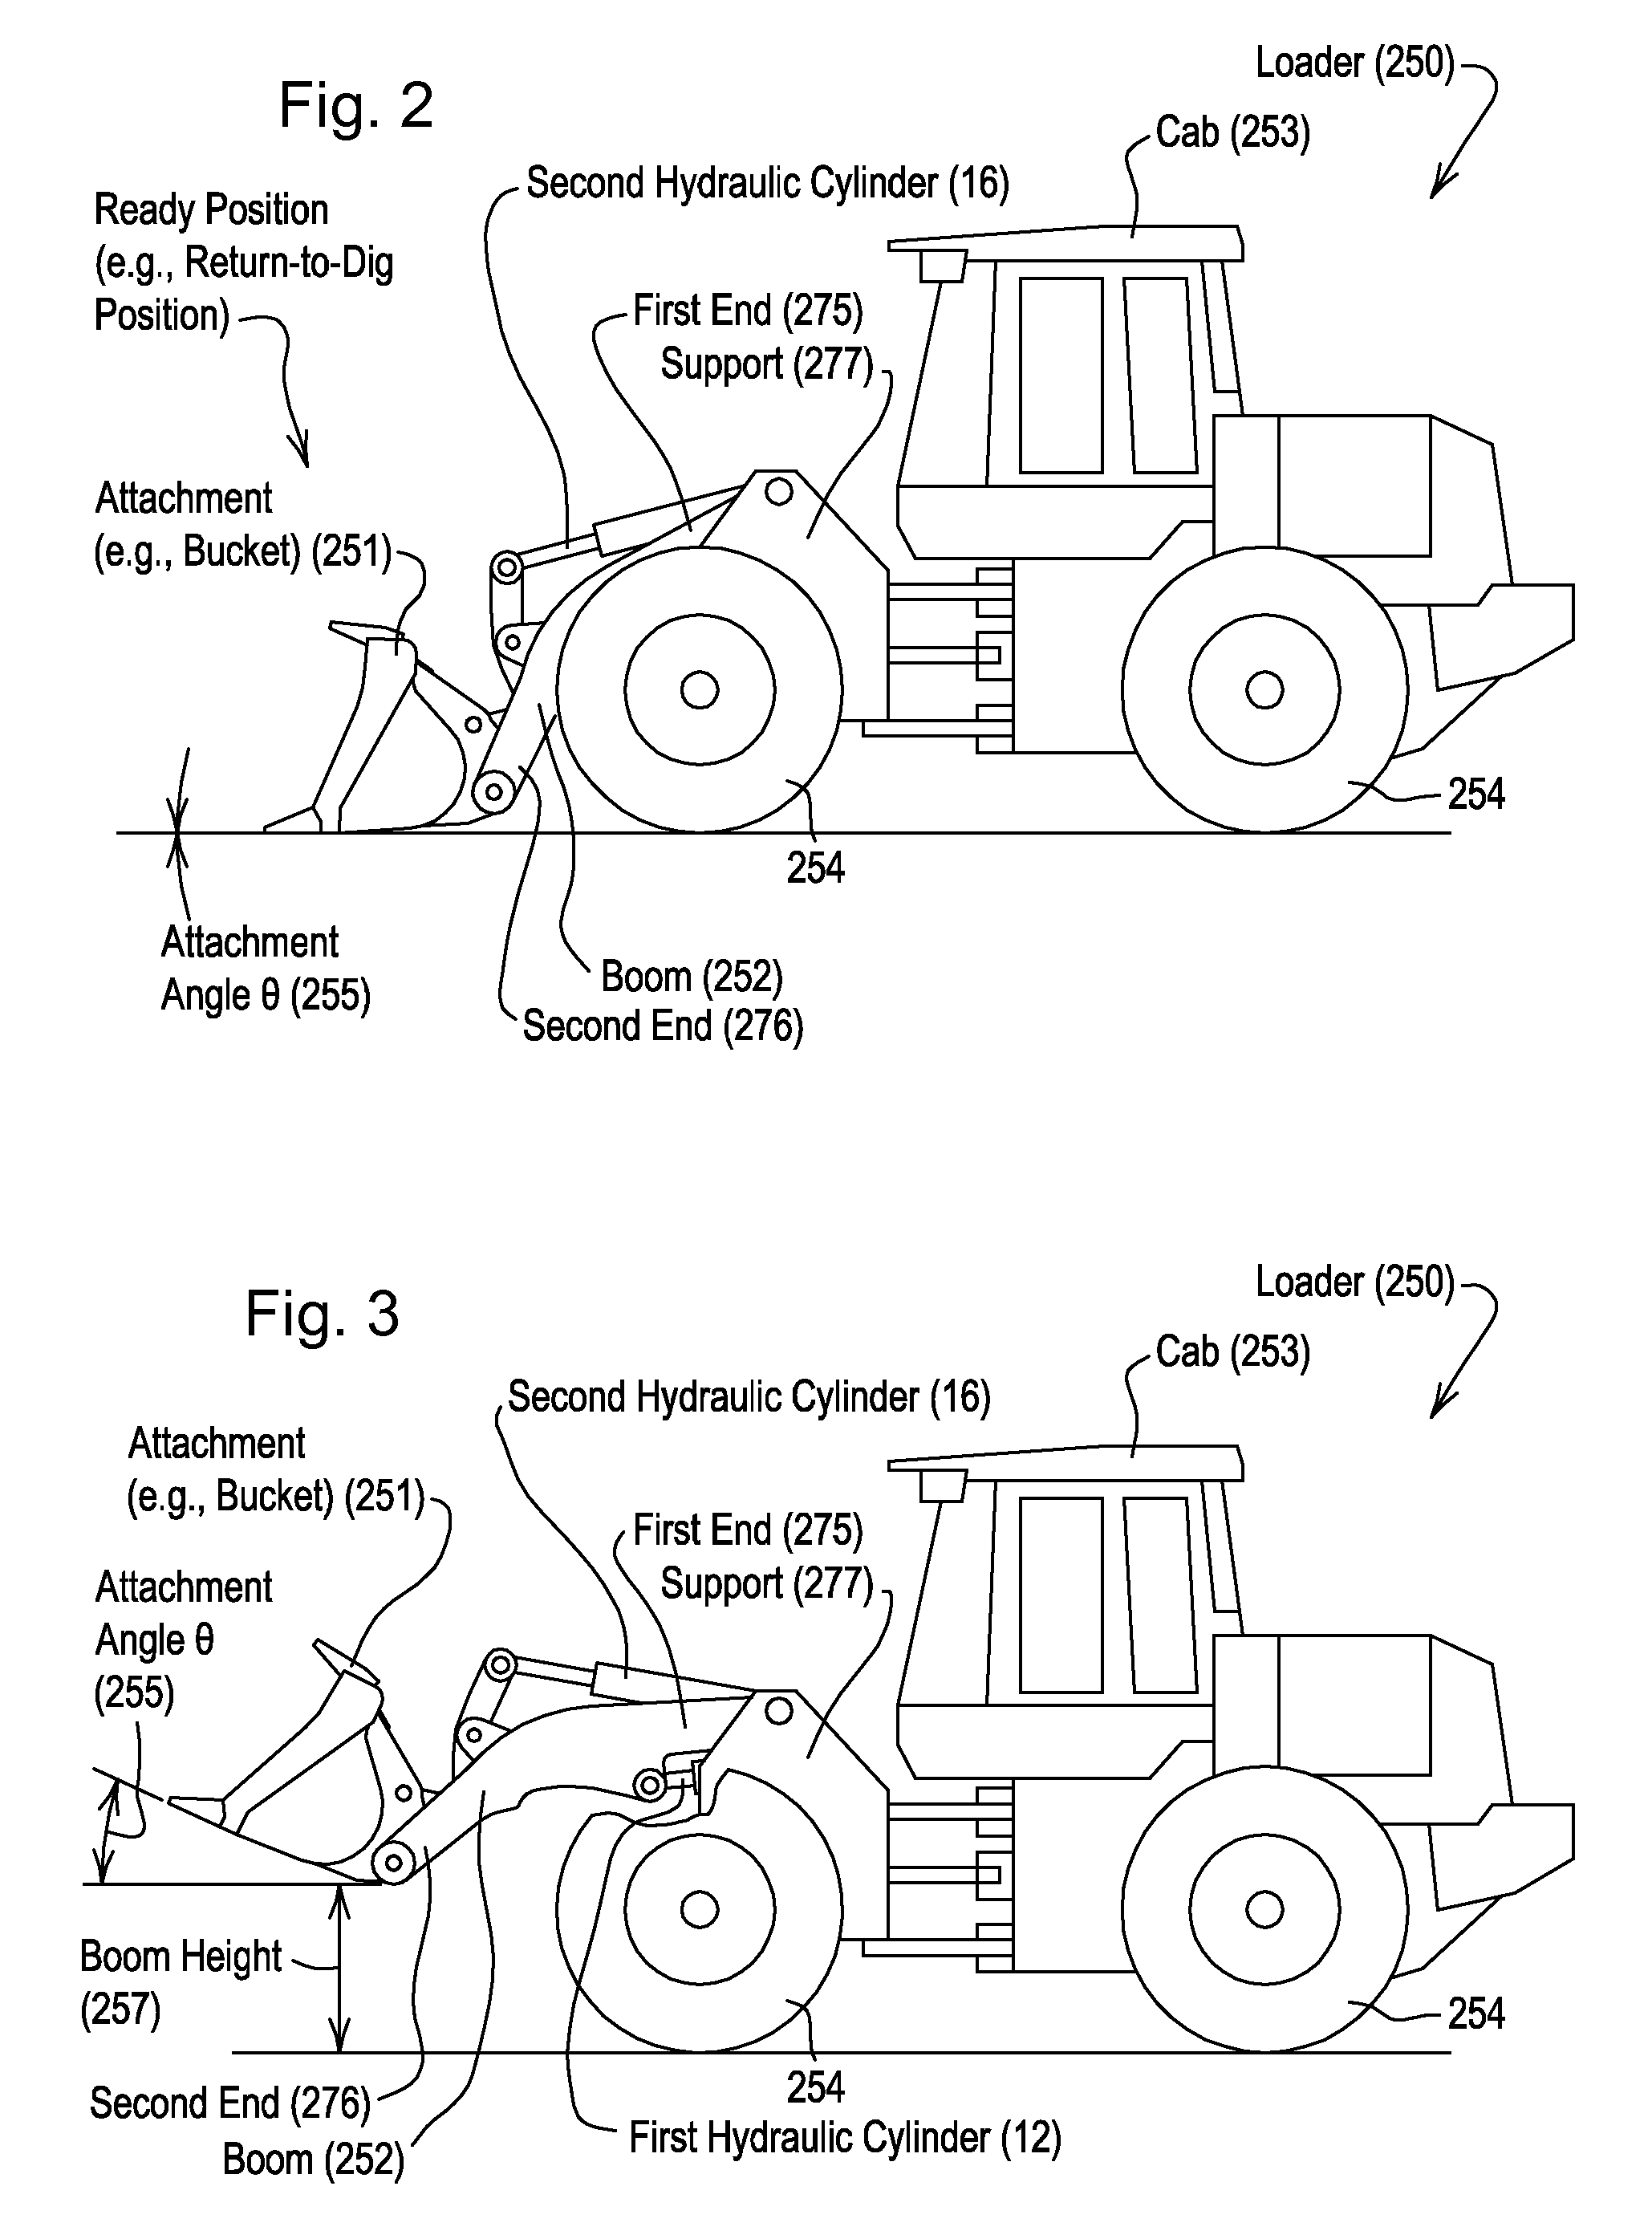 Automated control of boom and attachment for work vehicle